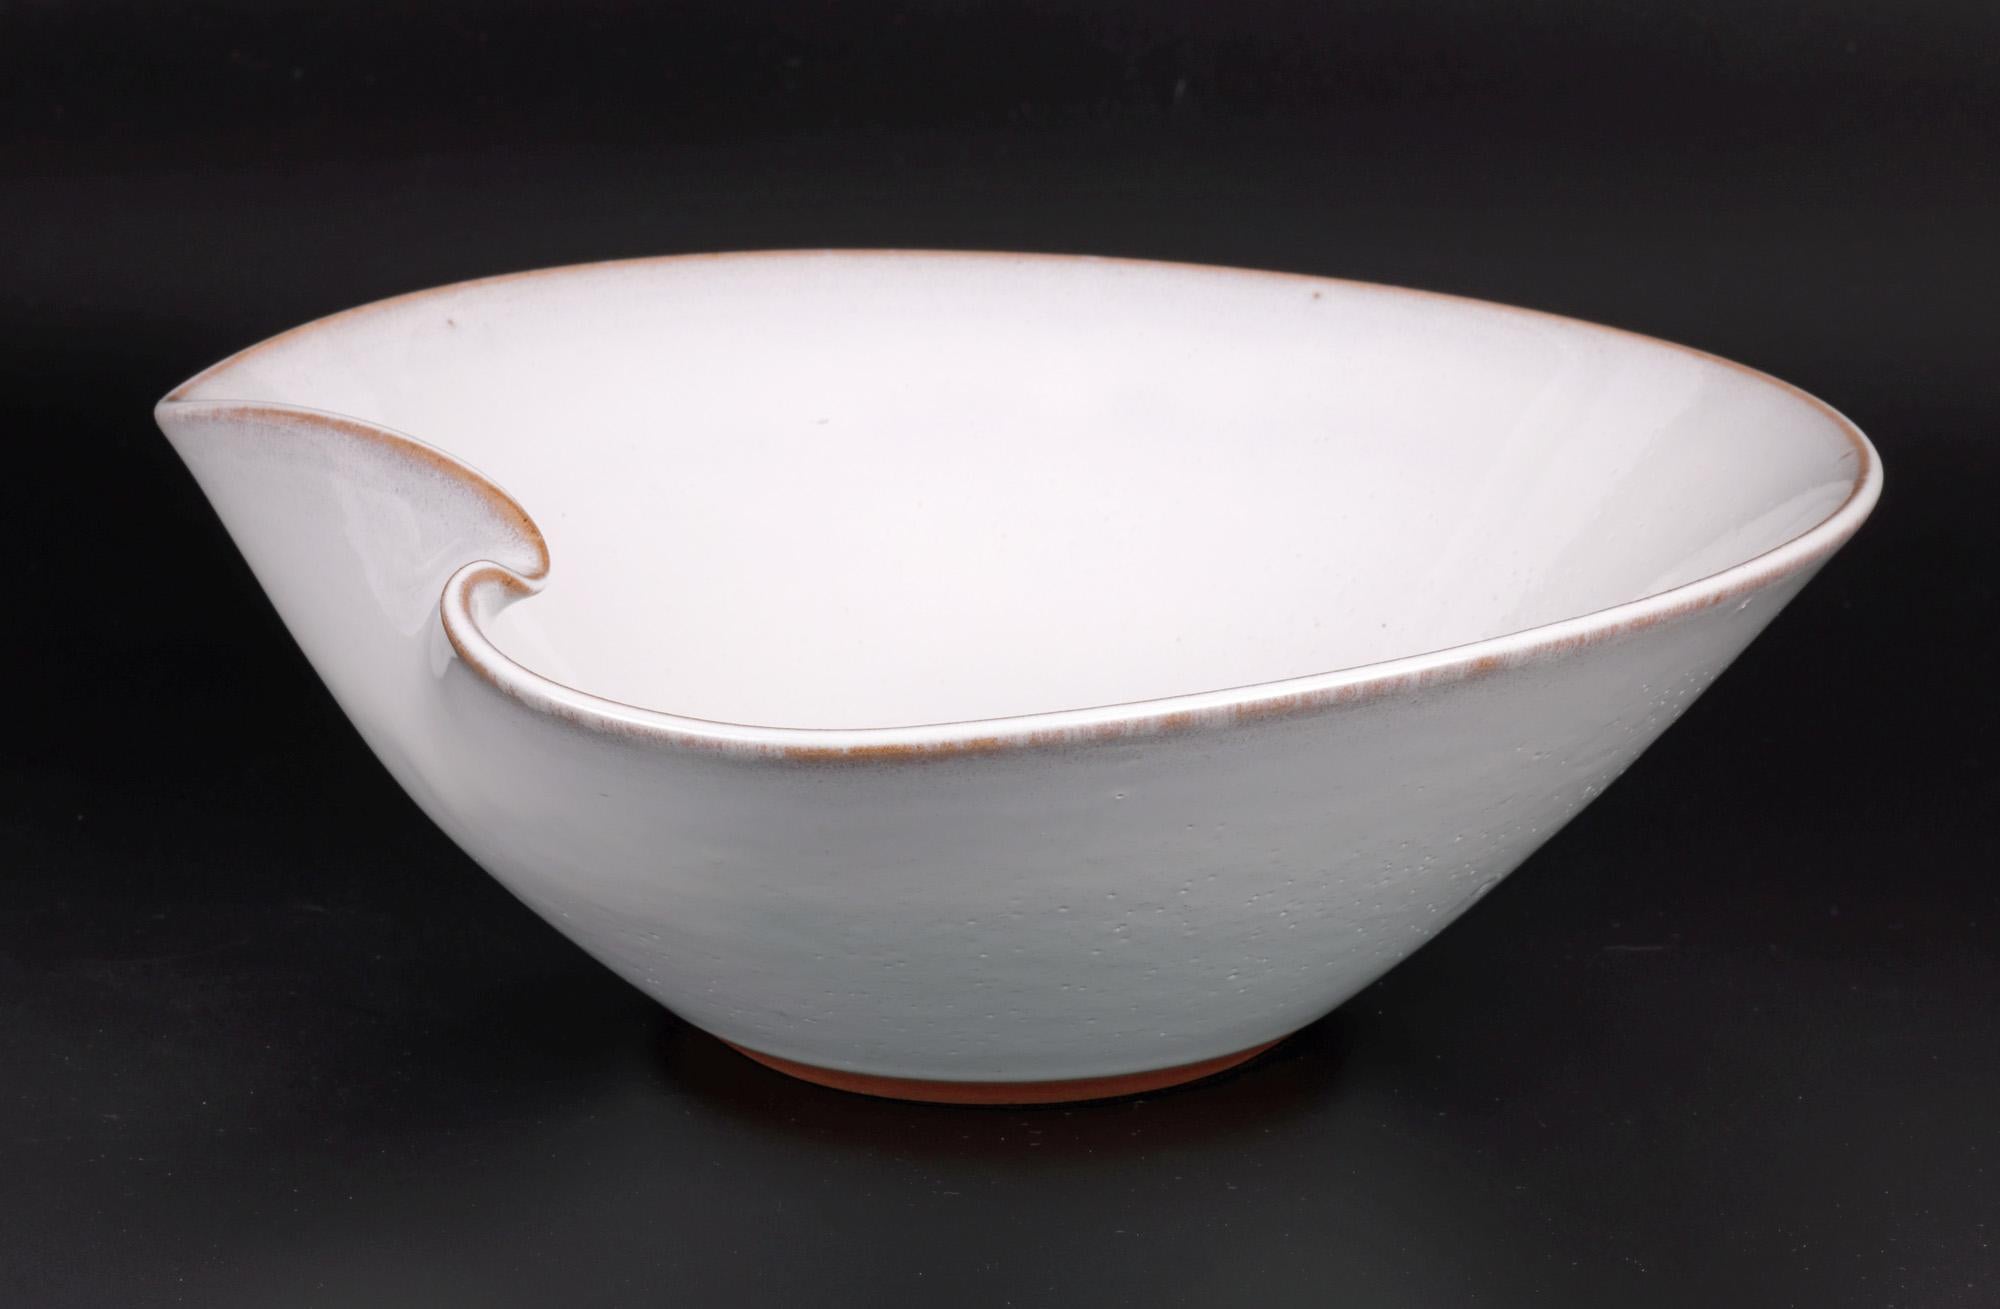 Japanese Organic Shaped White Glazed Studio Pottery Bowl In Good Condition For Sale In Bishop's Stortford, Hertfordshire